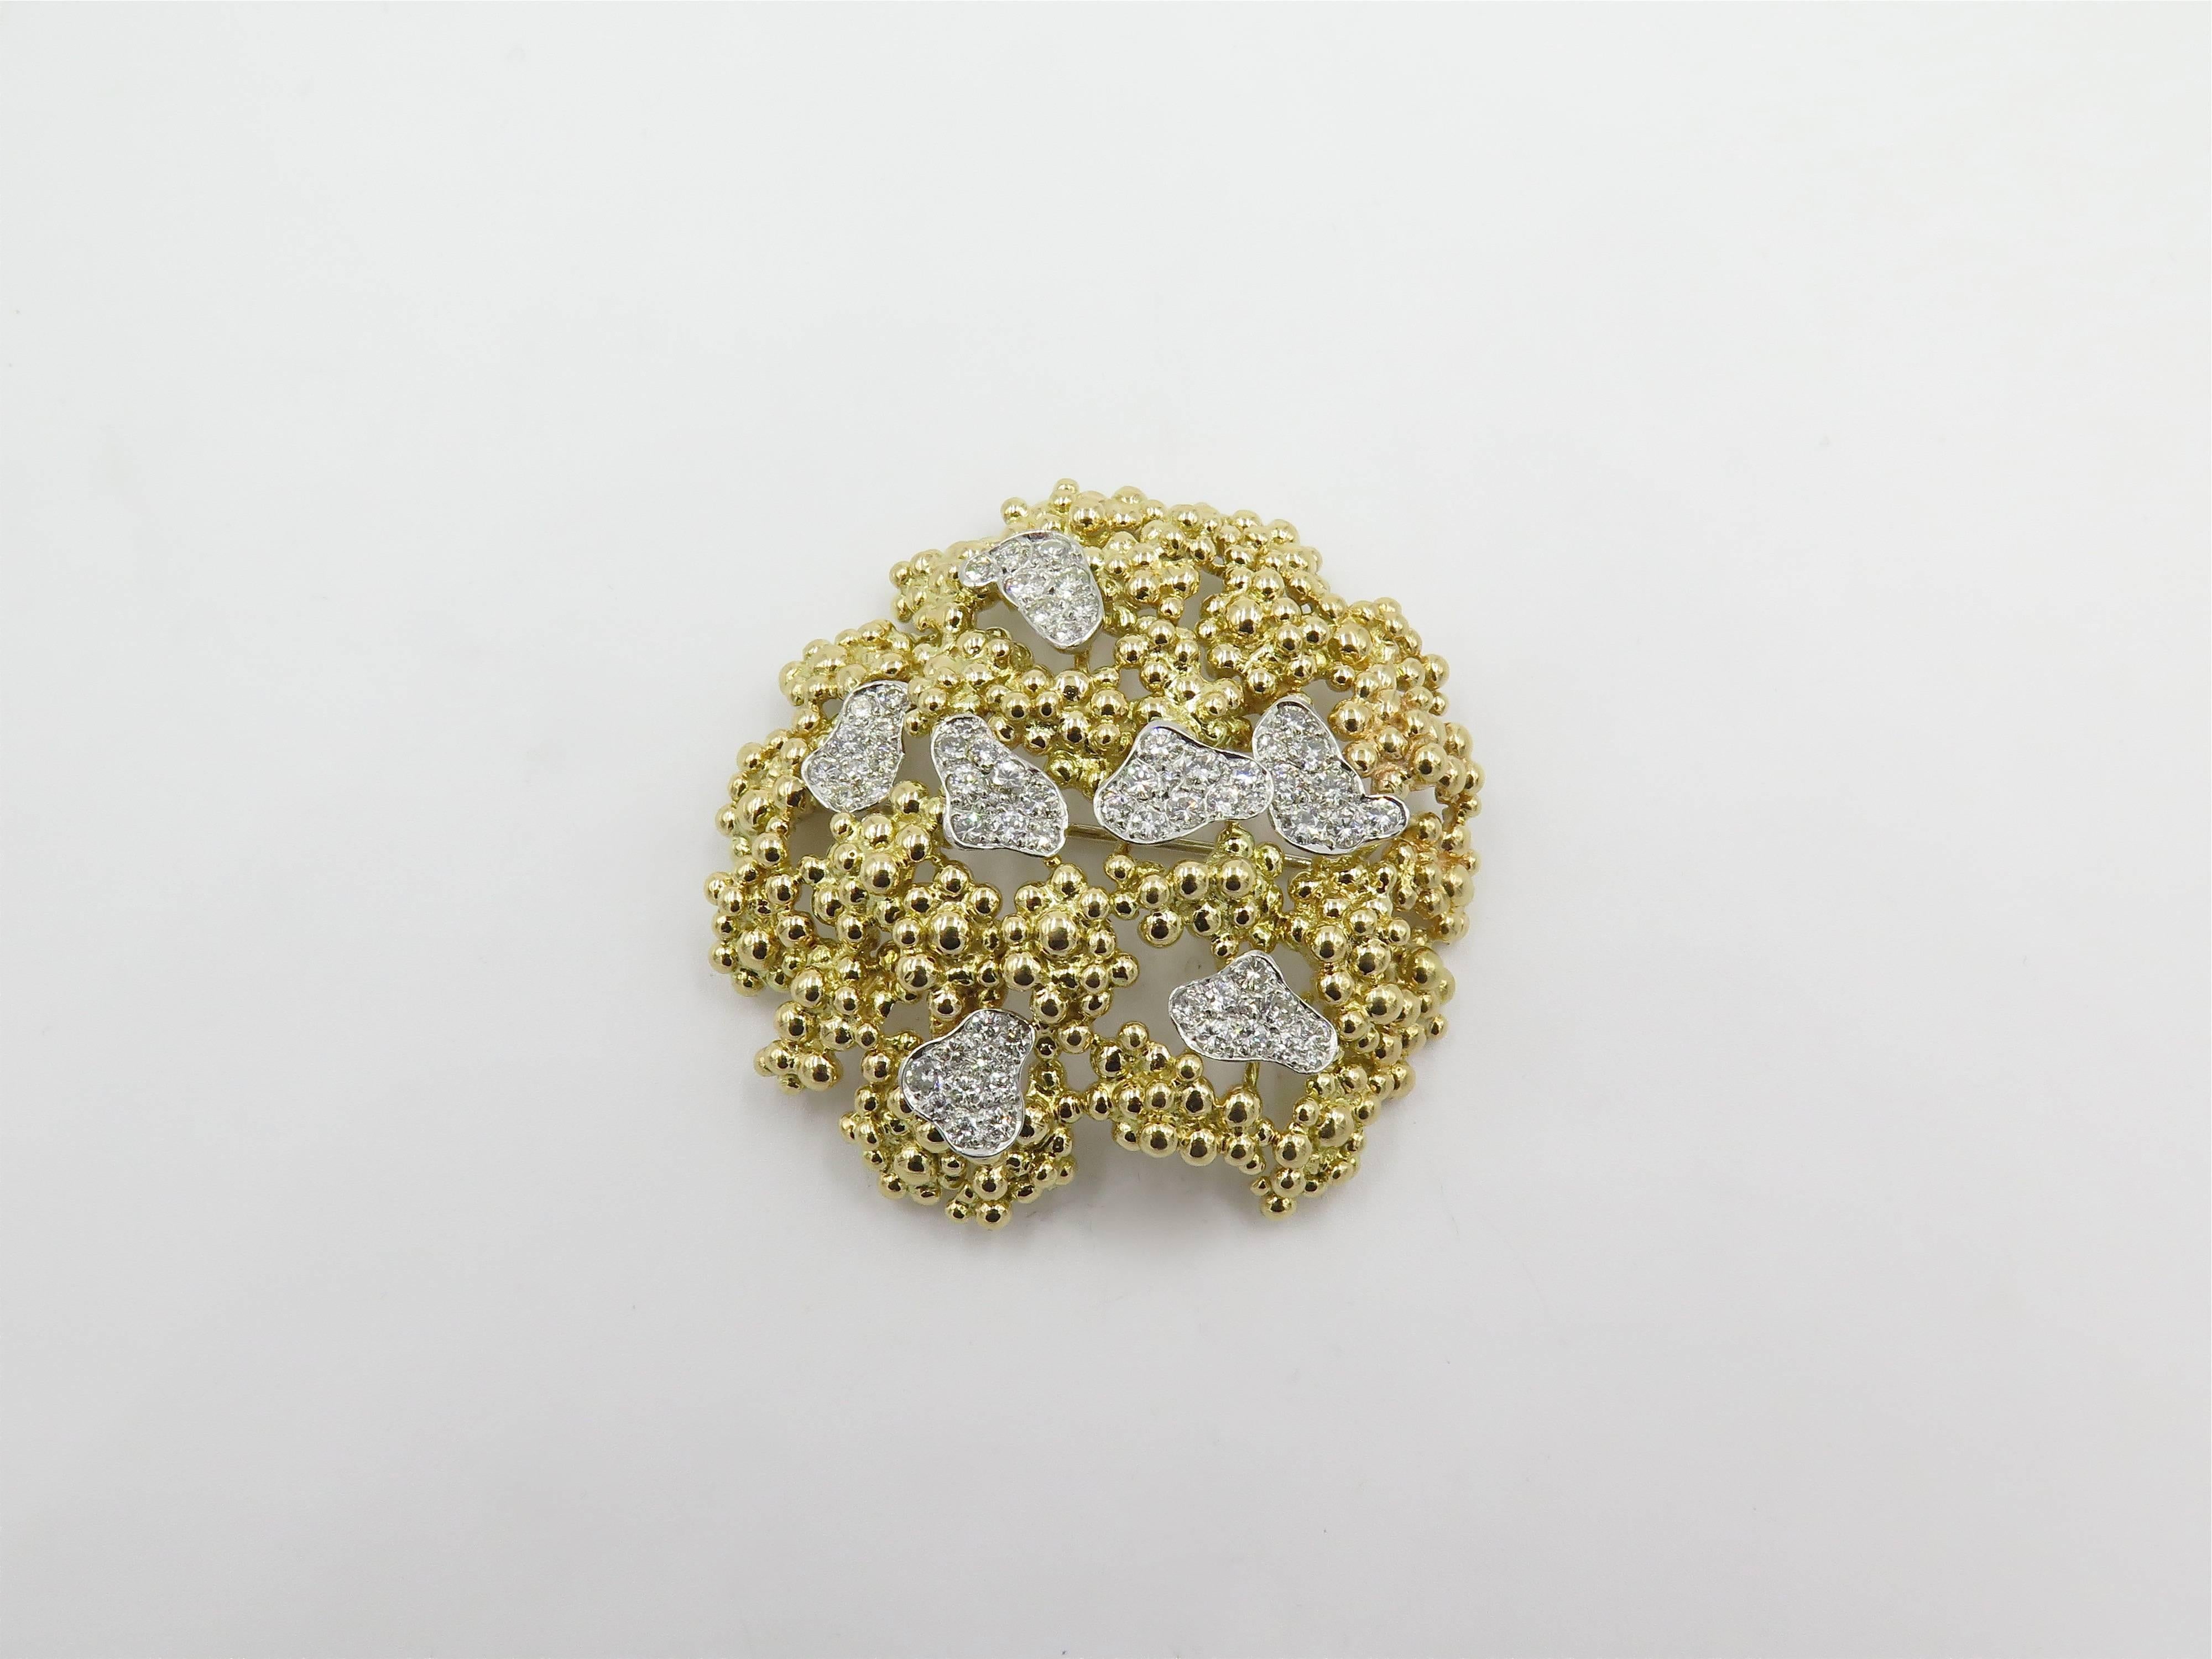 An 18 karat yellow gold, platinum and diamond brooch and earring set. Marian Ostier. Circa 1960. The brooch of free form openwork beaded design, enhanced by pave set diamond panels, and a pair of earrings en suite. The brooch is set with fifty eight